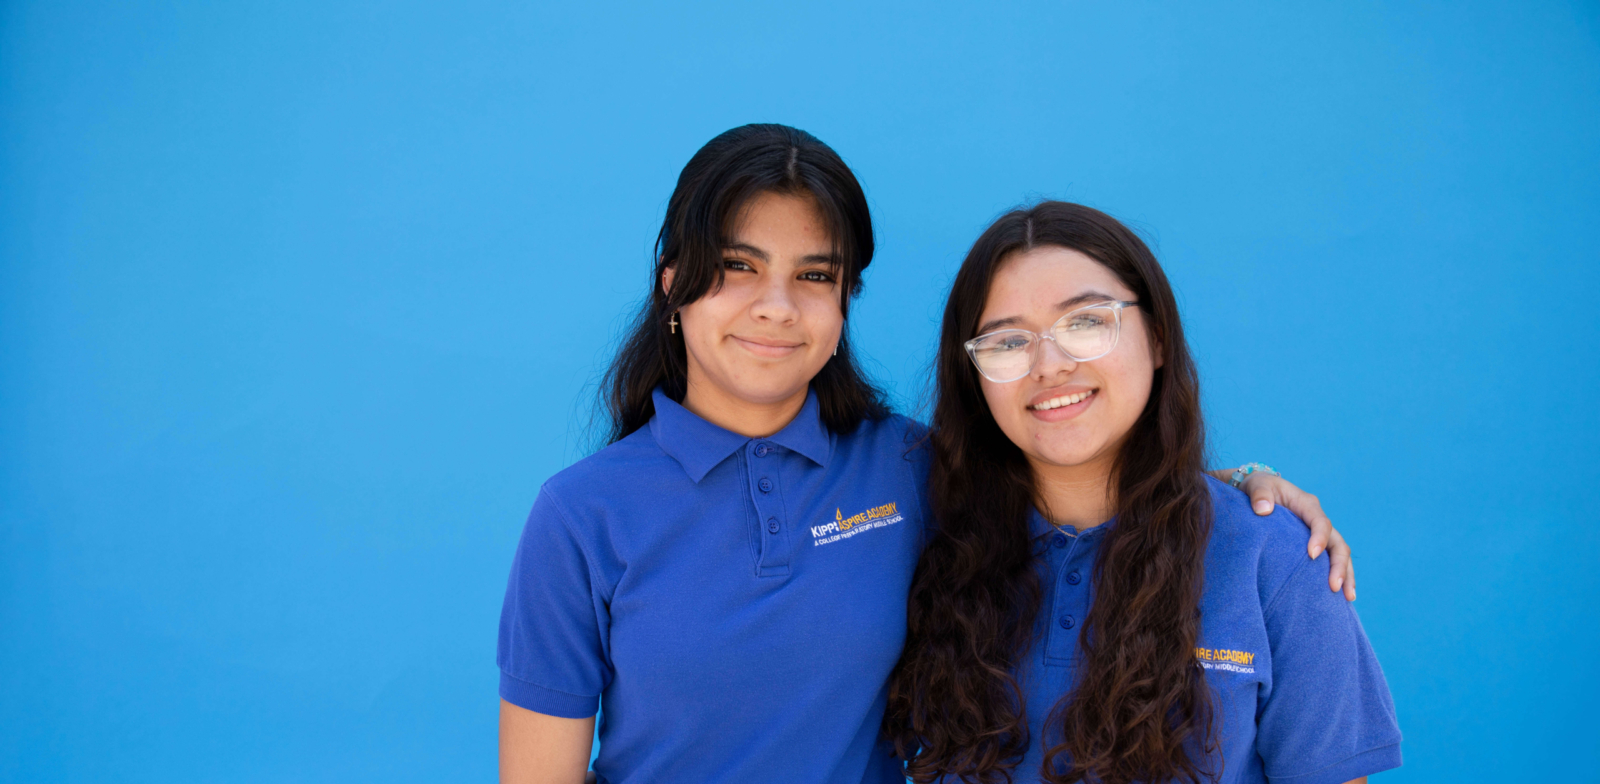 Two KIPP Texas Middle School Students Smiling